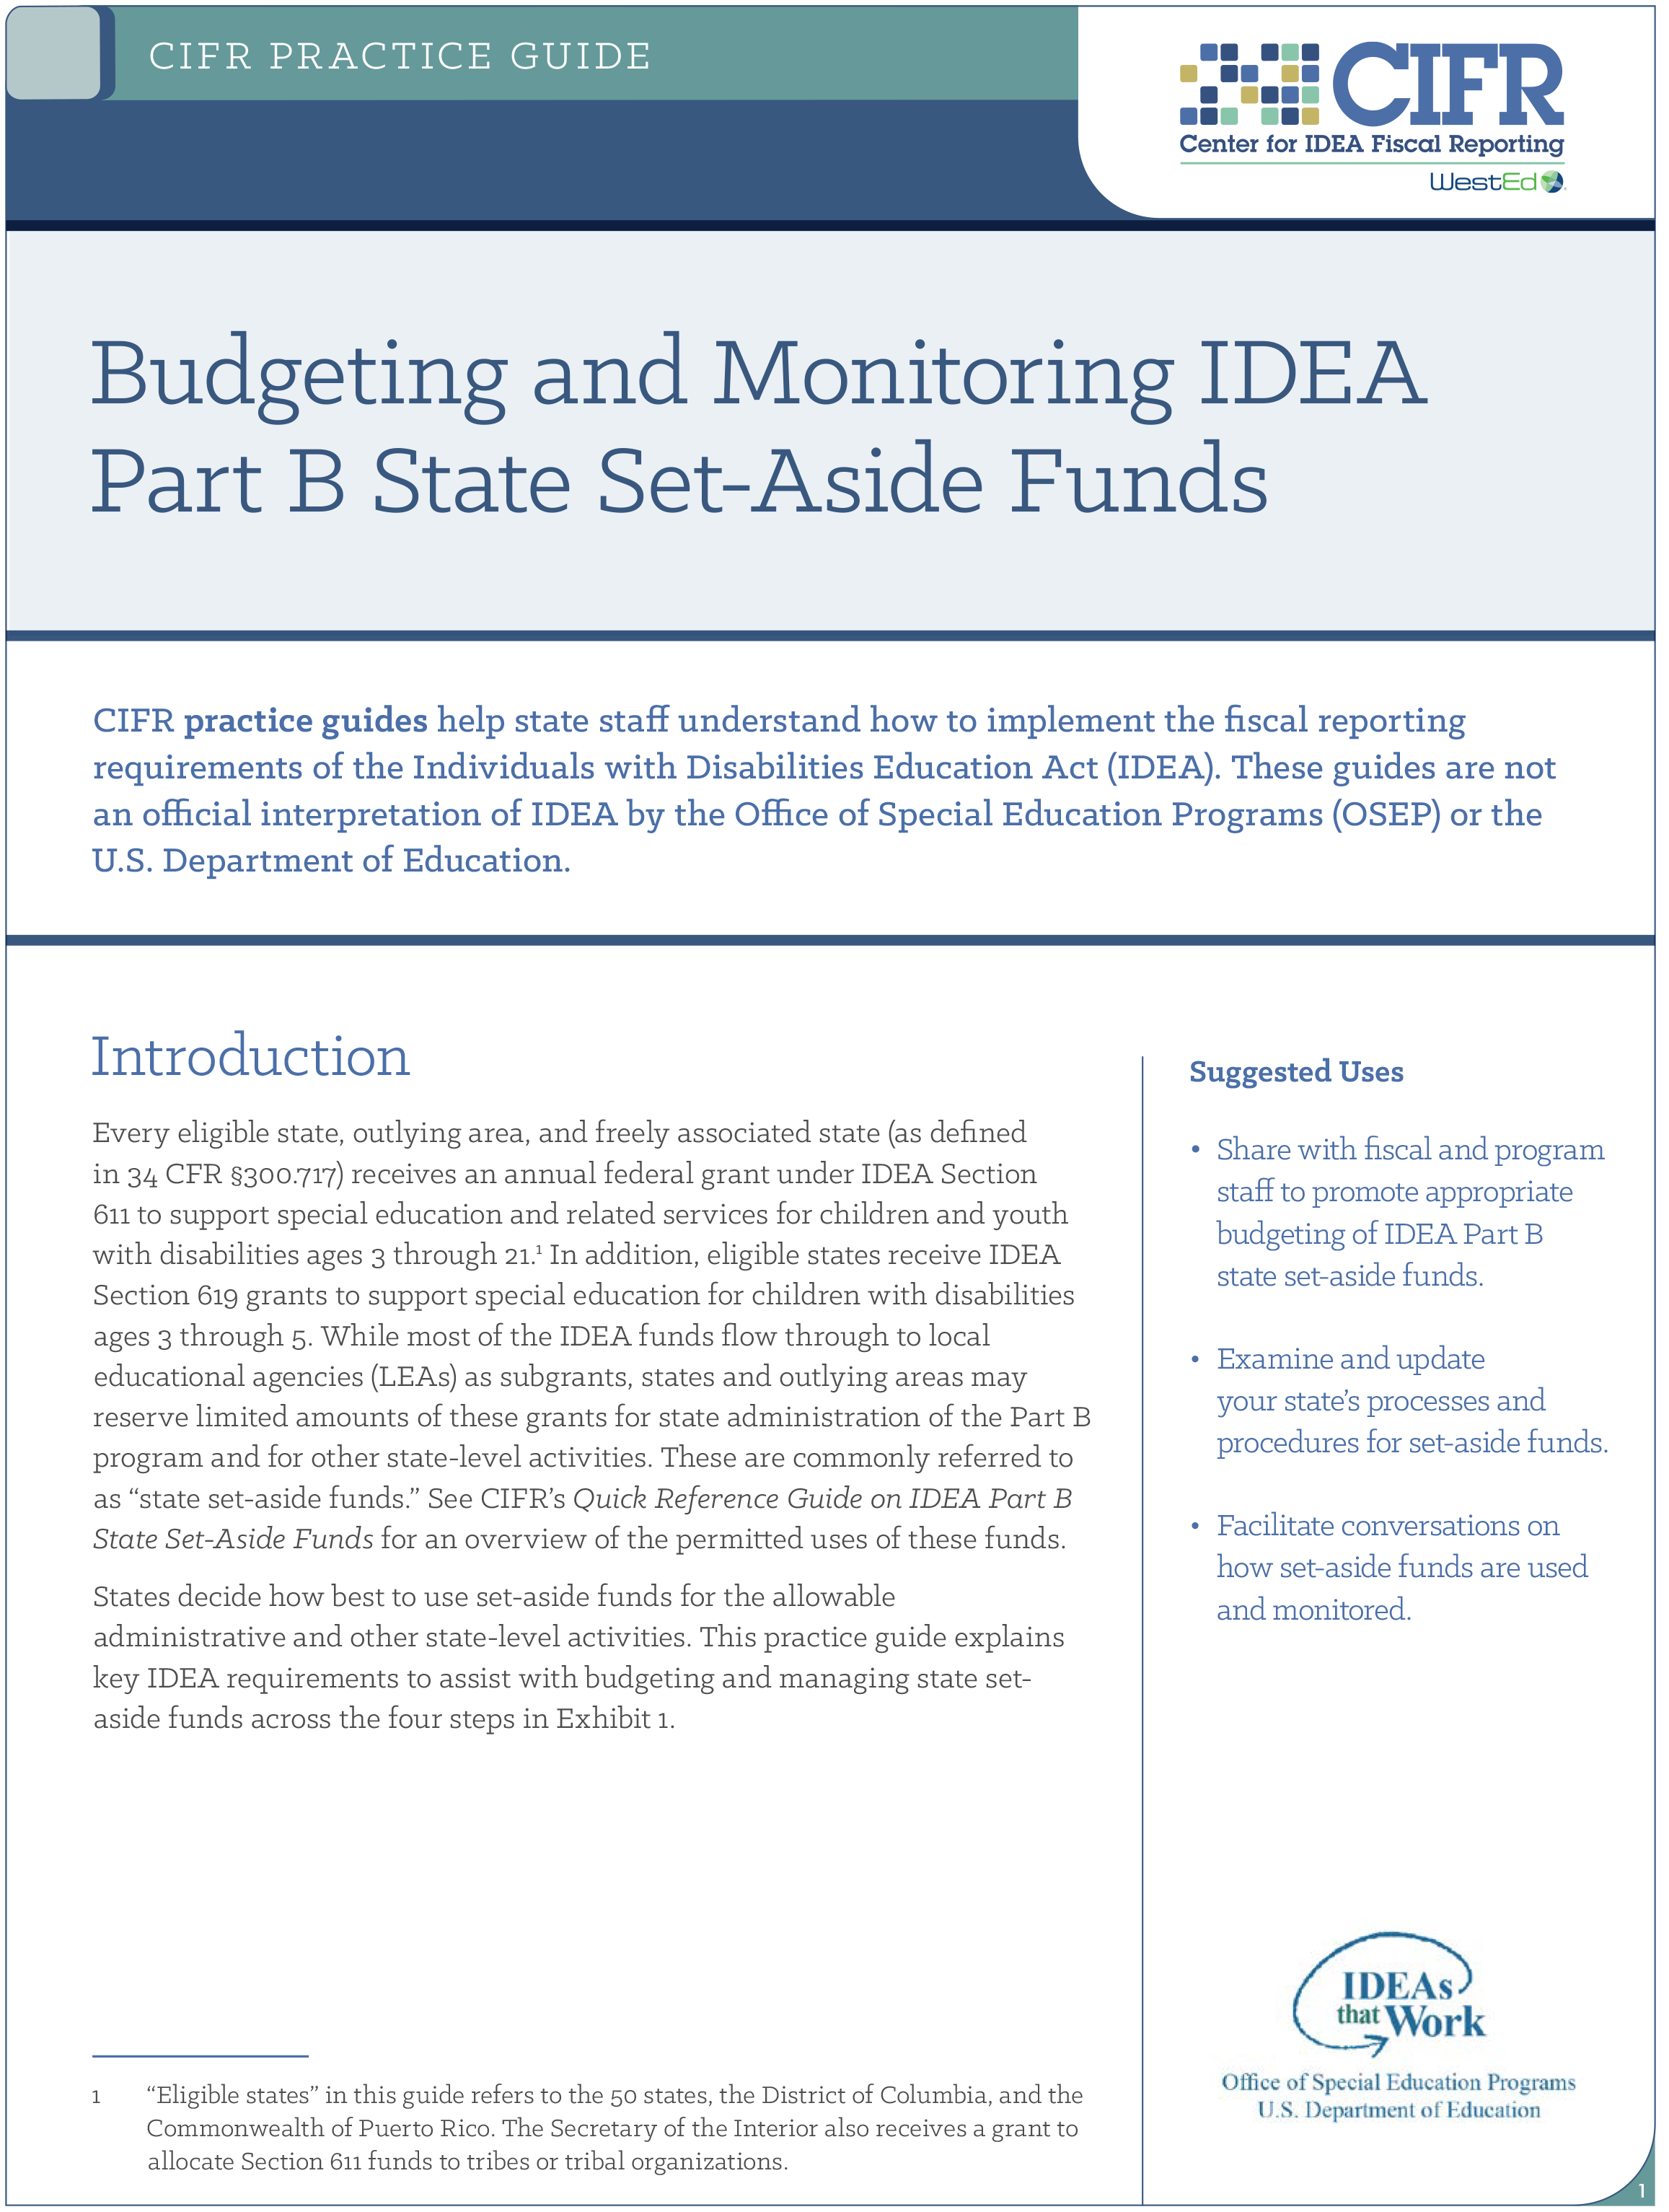 Image of page one of the Budgeting and Monitoring IDEA zpart B State-Set Aside Funds practice guide.